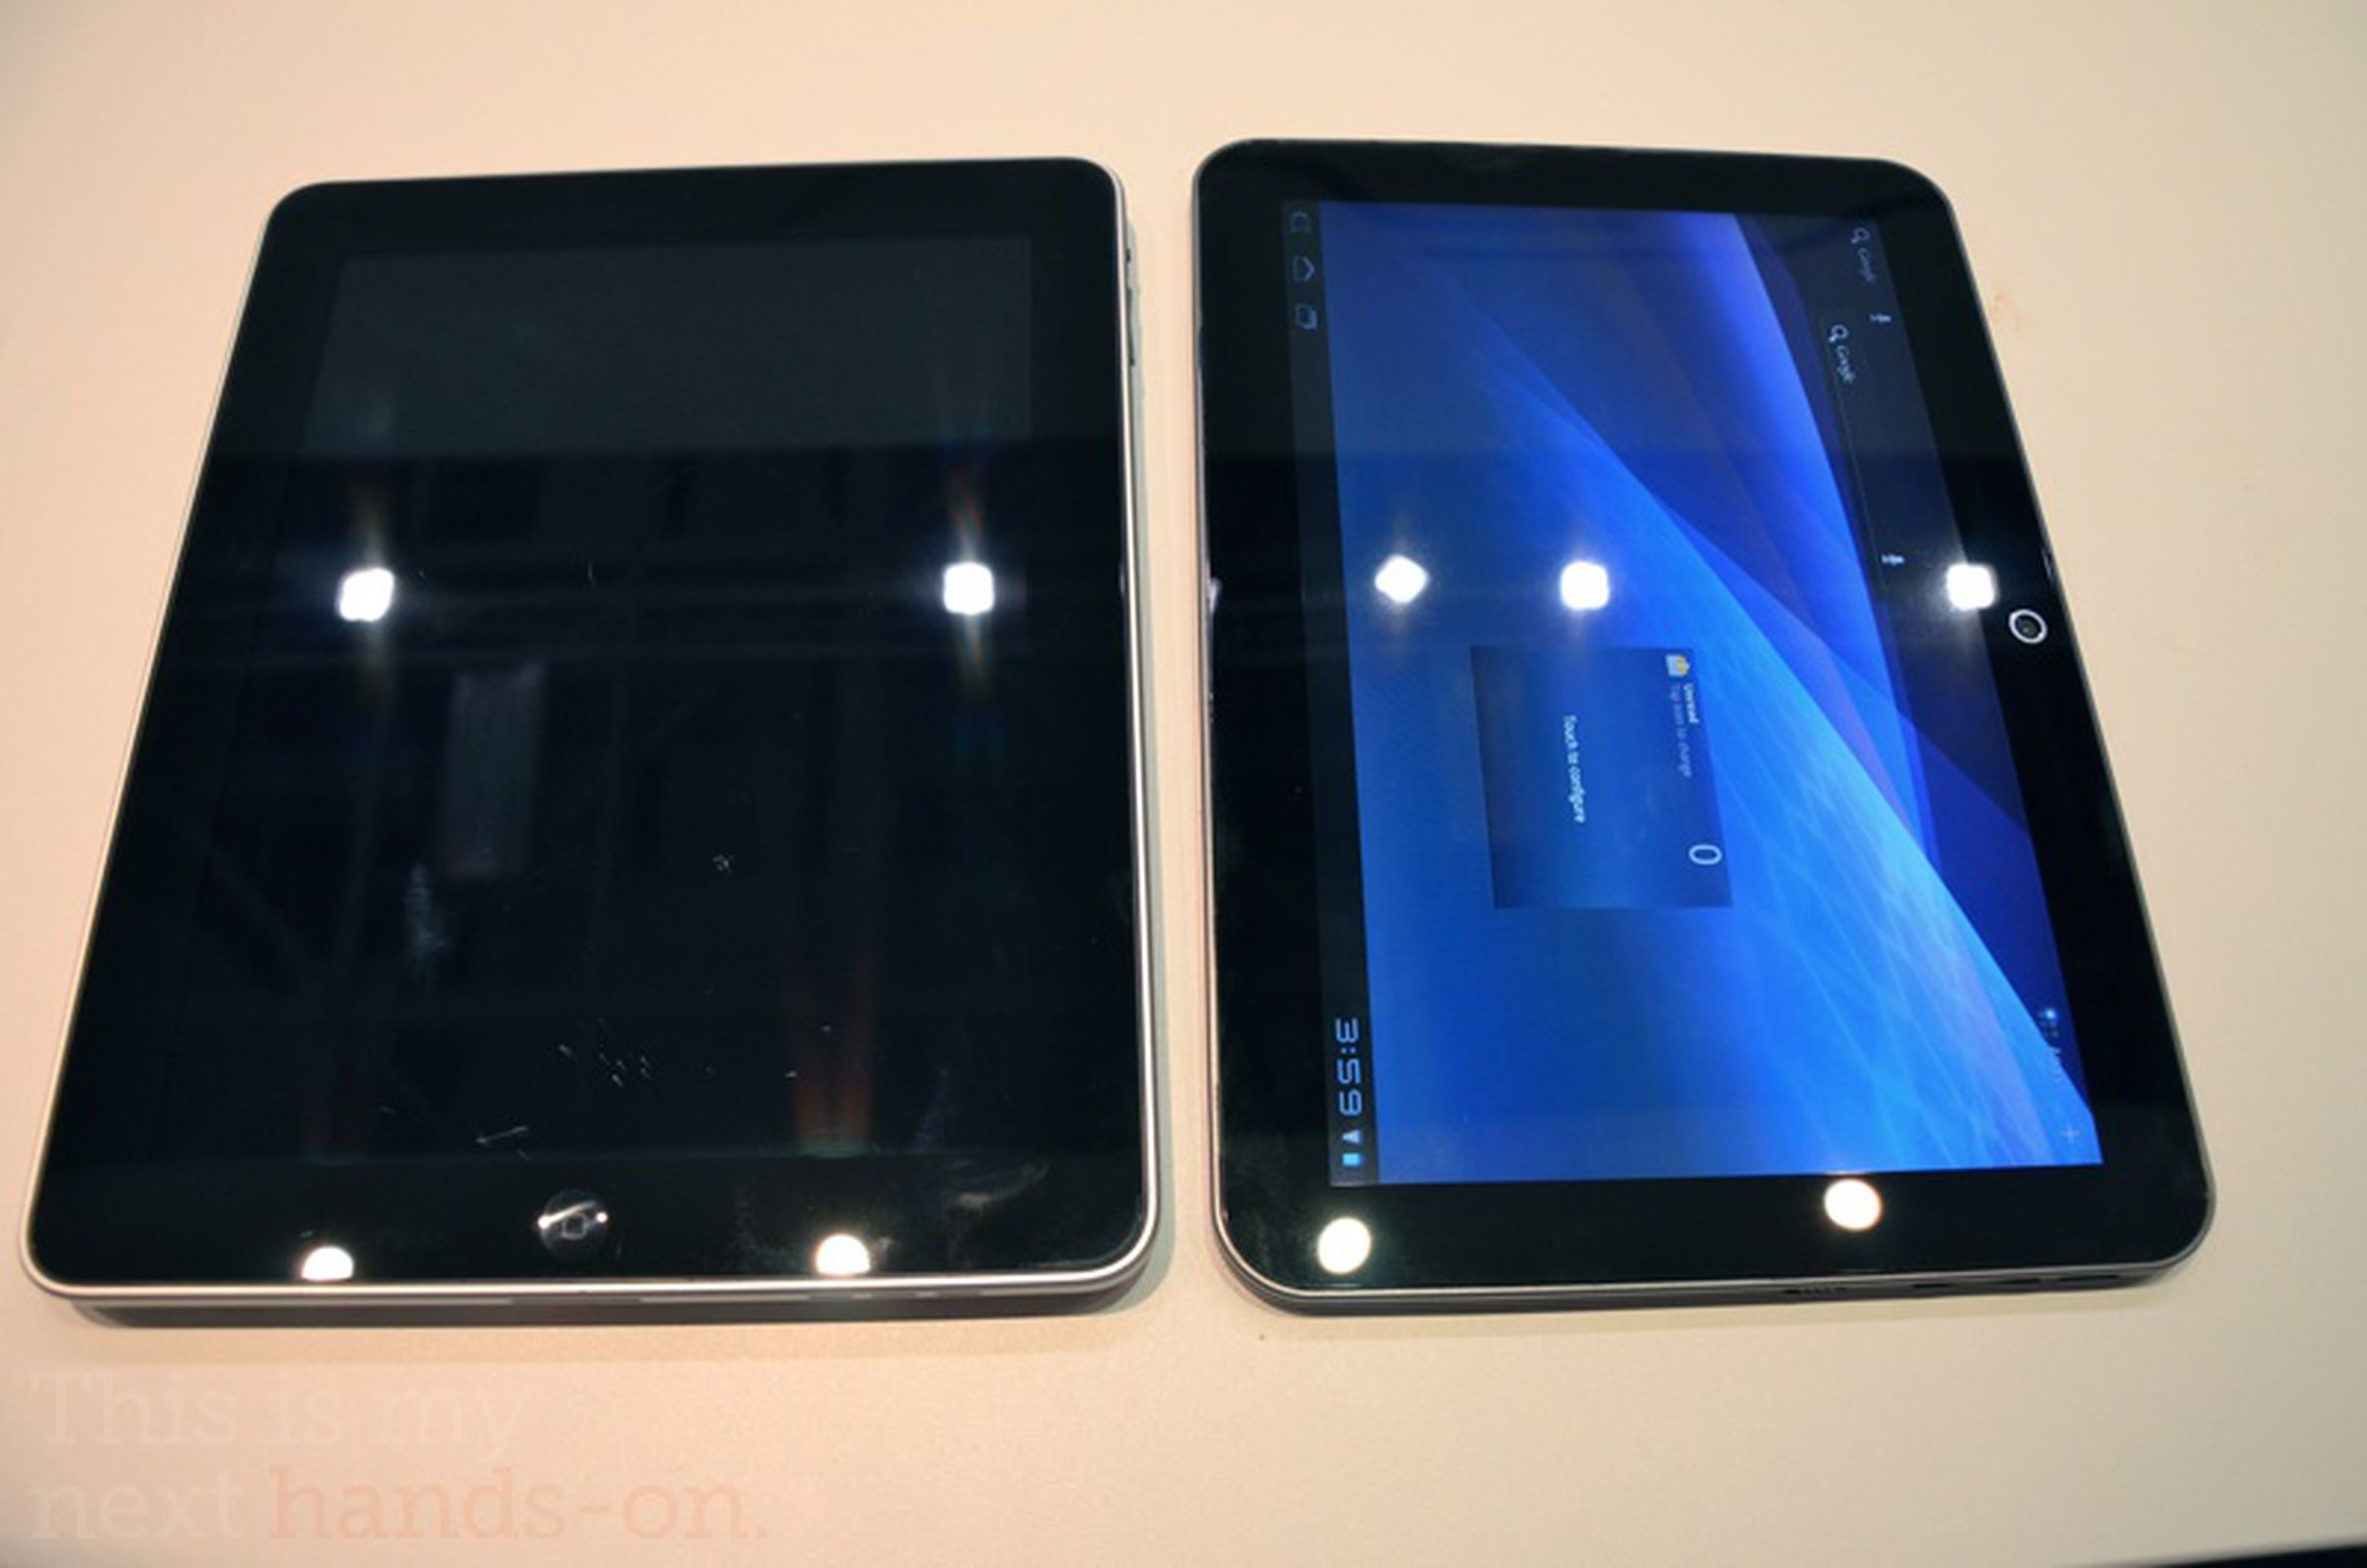 Toshiba Excite / AT200 tablet hands-on photos